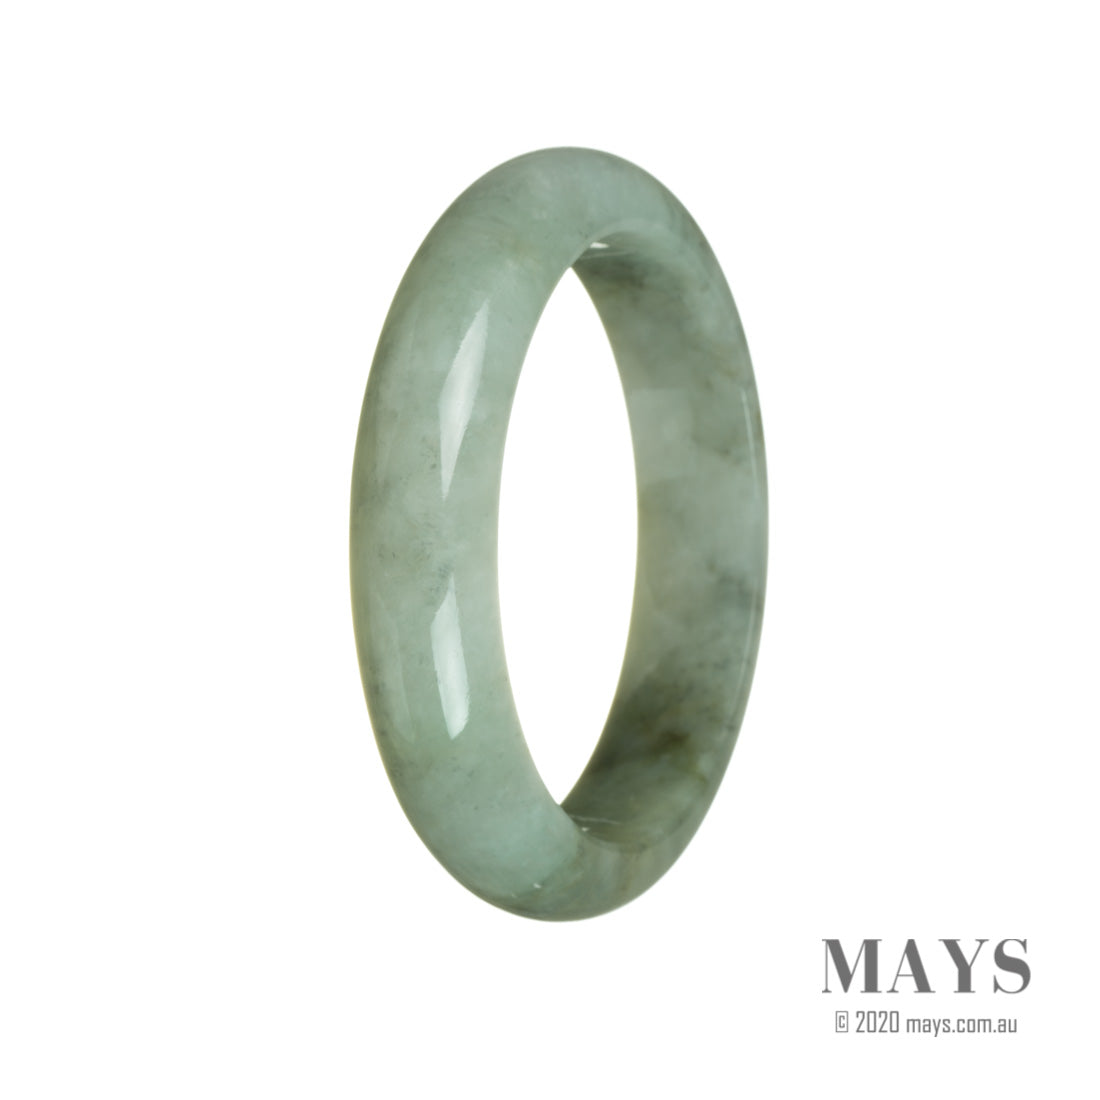 A close-up image of a pale green jadeite jade bangle bracelet. The bracelet is shaped like a half moon and has a smooth, polished surface. It is certified as Grade A Green, indicating high quality. The brand name "MAYS™" is also mentioned.